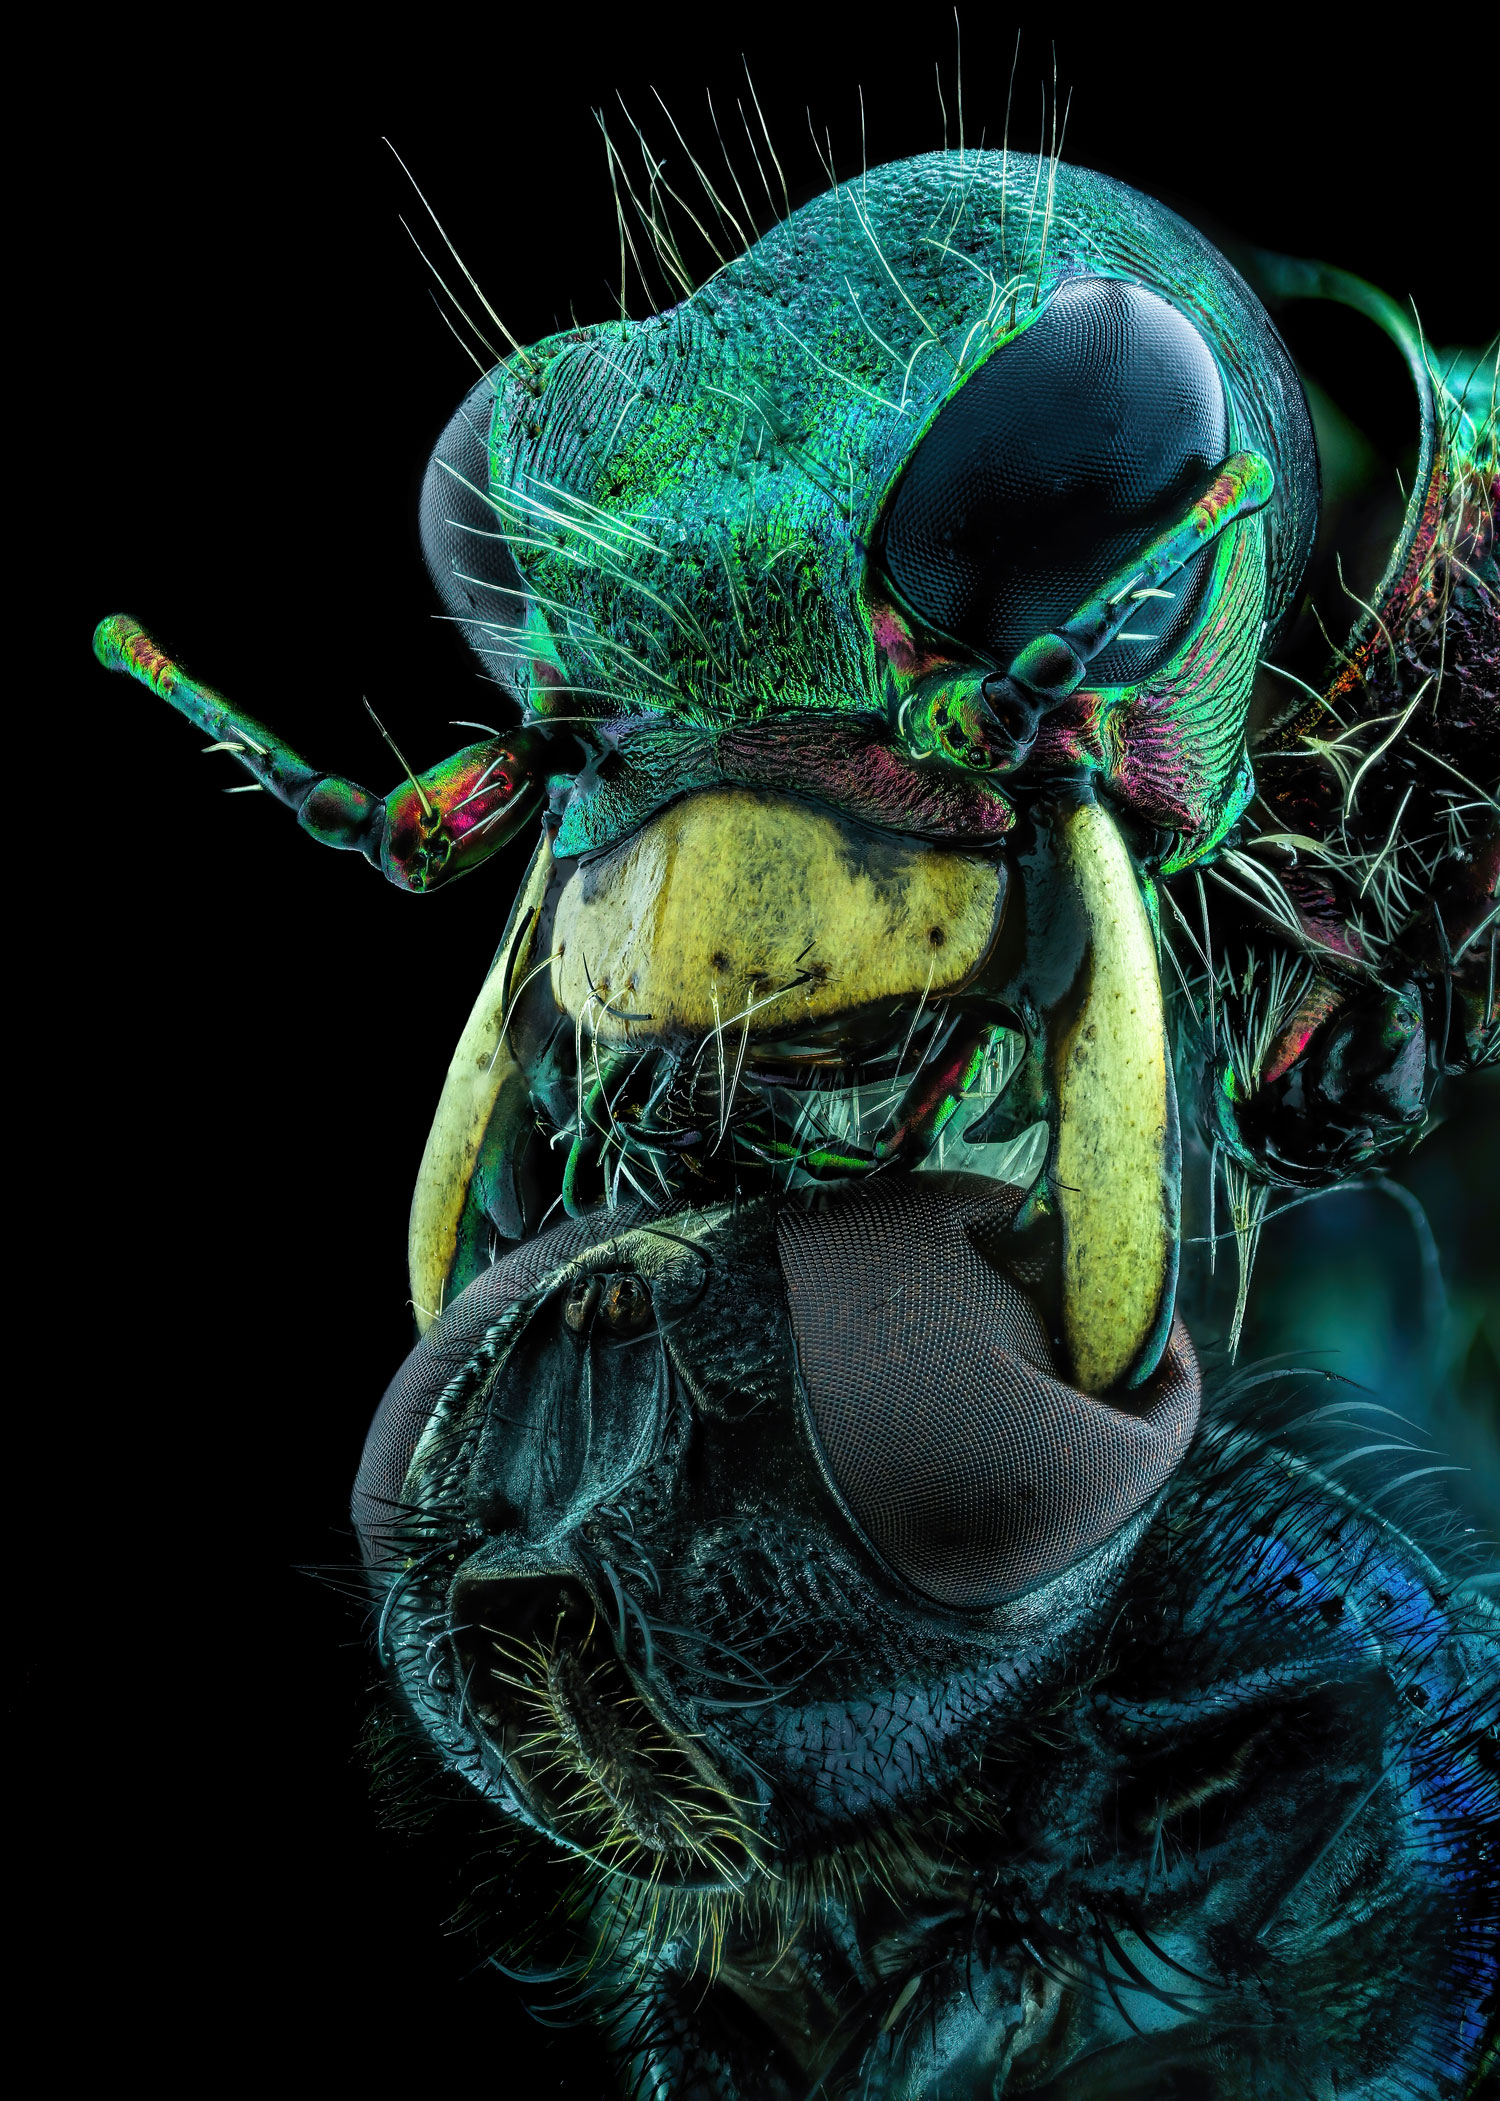 the face of a tiger beetle holding a fly under its chin. The beetle is shown in bright greens and yellows, with huge dark eyes